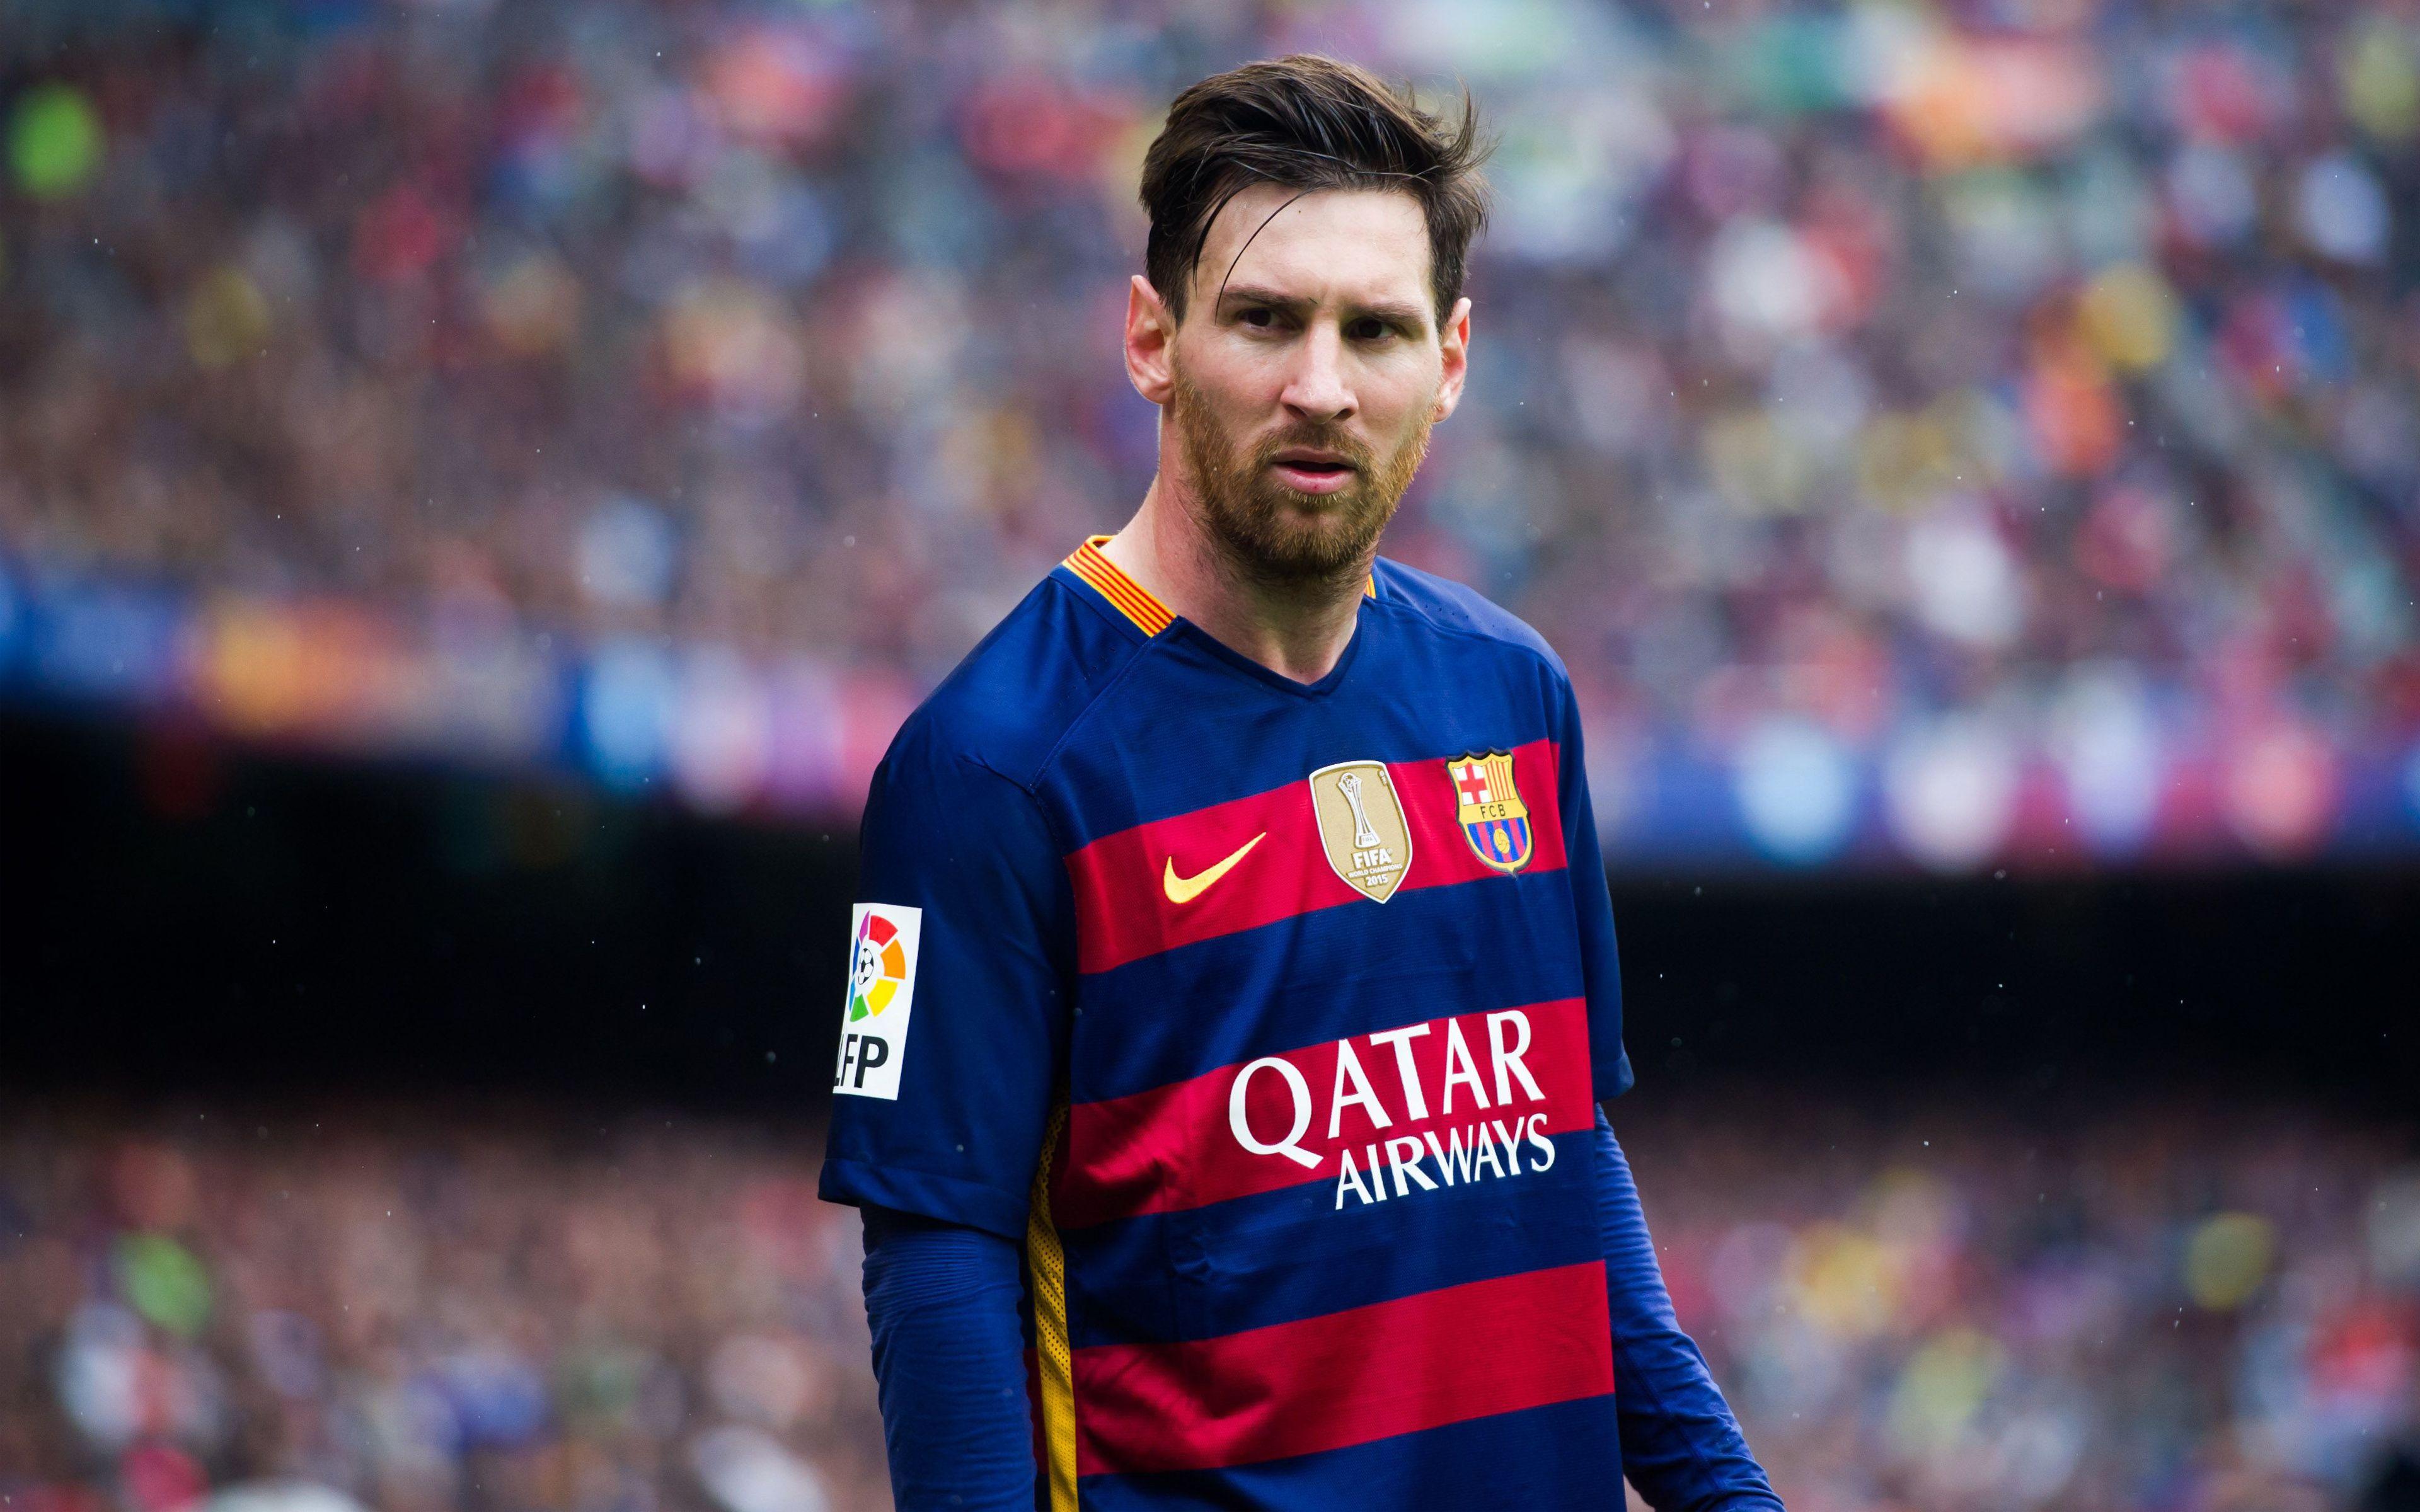 Lionel Messi 4K Wallpaper Download : Messi Wallpapers, Pictures, Images